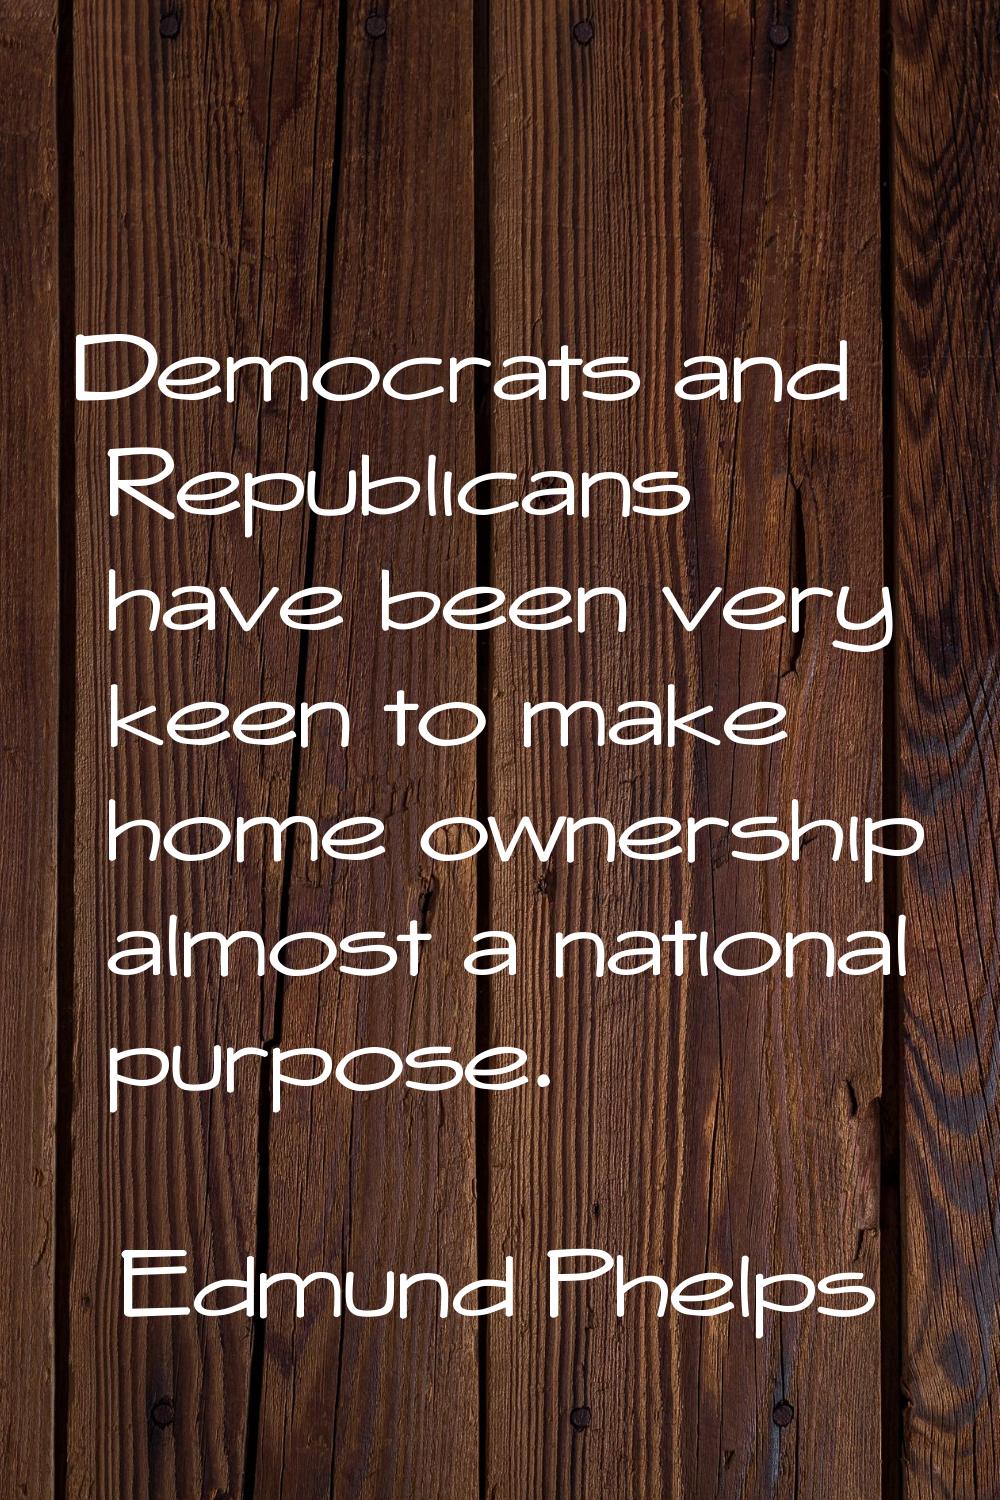 Democrats and Republicans have been very keen to make home ownership almost a national purpose.